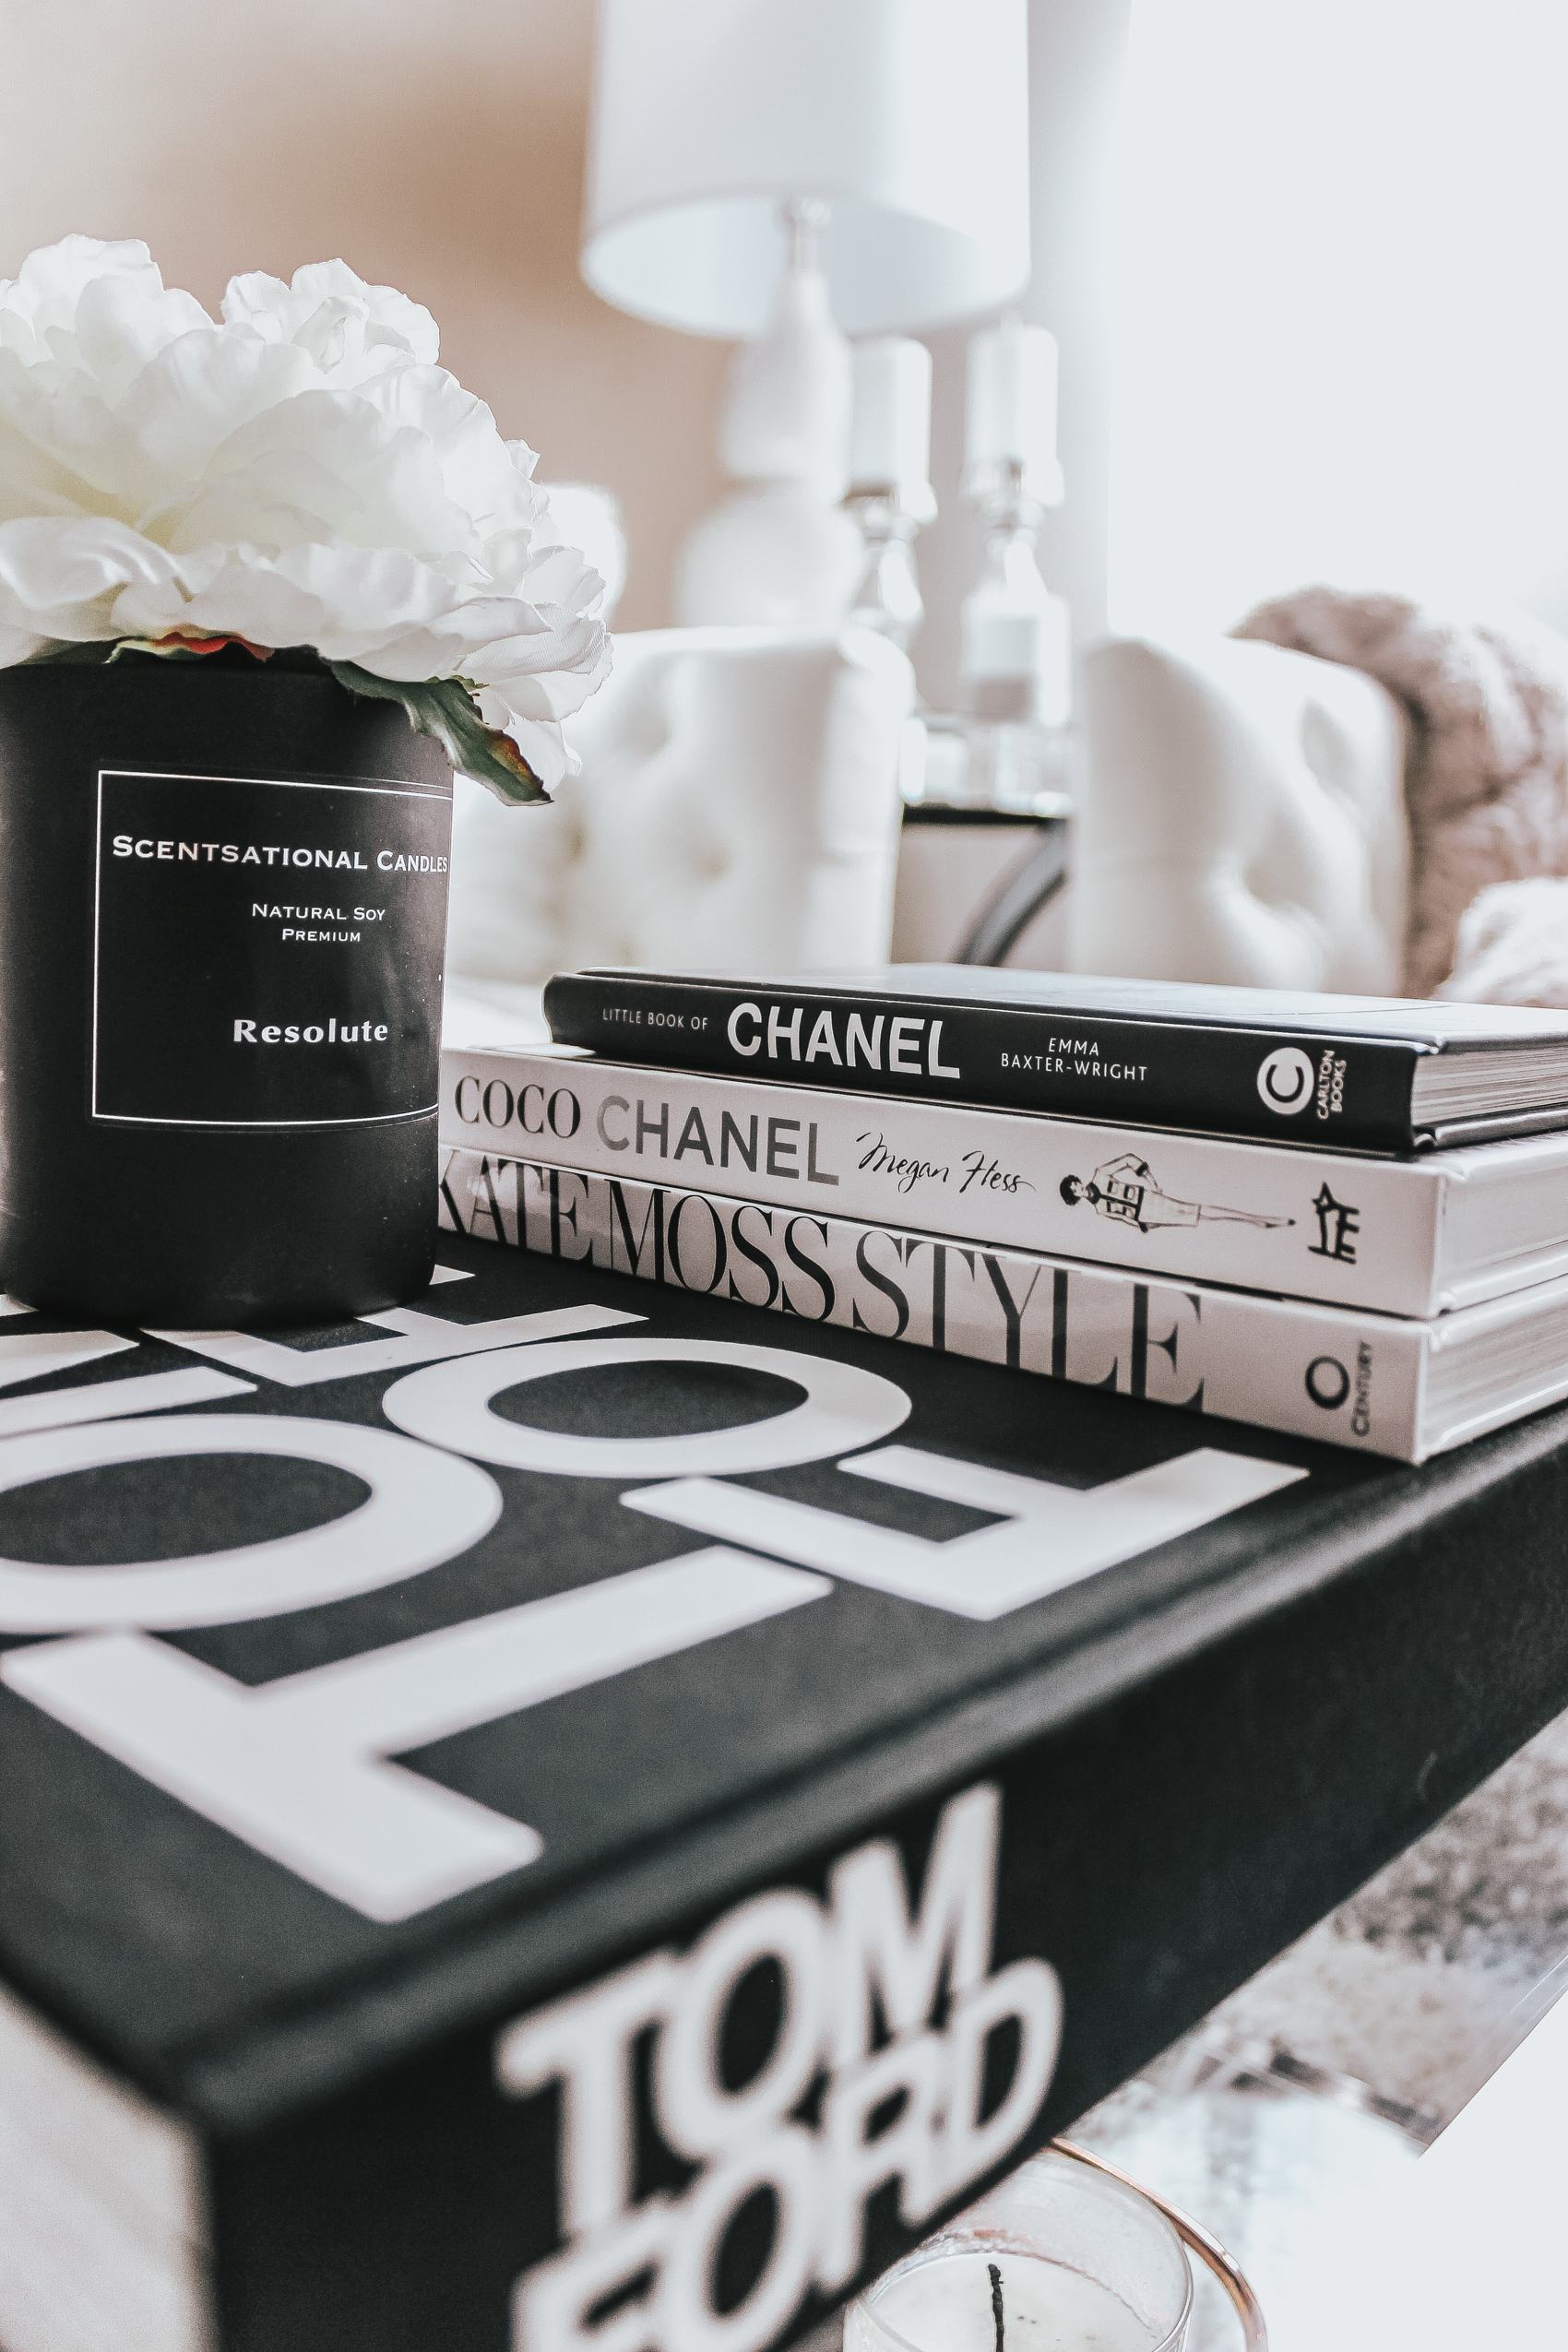 7 Tips For Styling Your Coffee Table | Coffee Table Styling | Coffee Table Books | Neutral Living Room | Home Decor | Blondie in the City by Hayley Larue